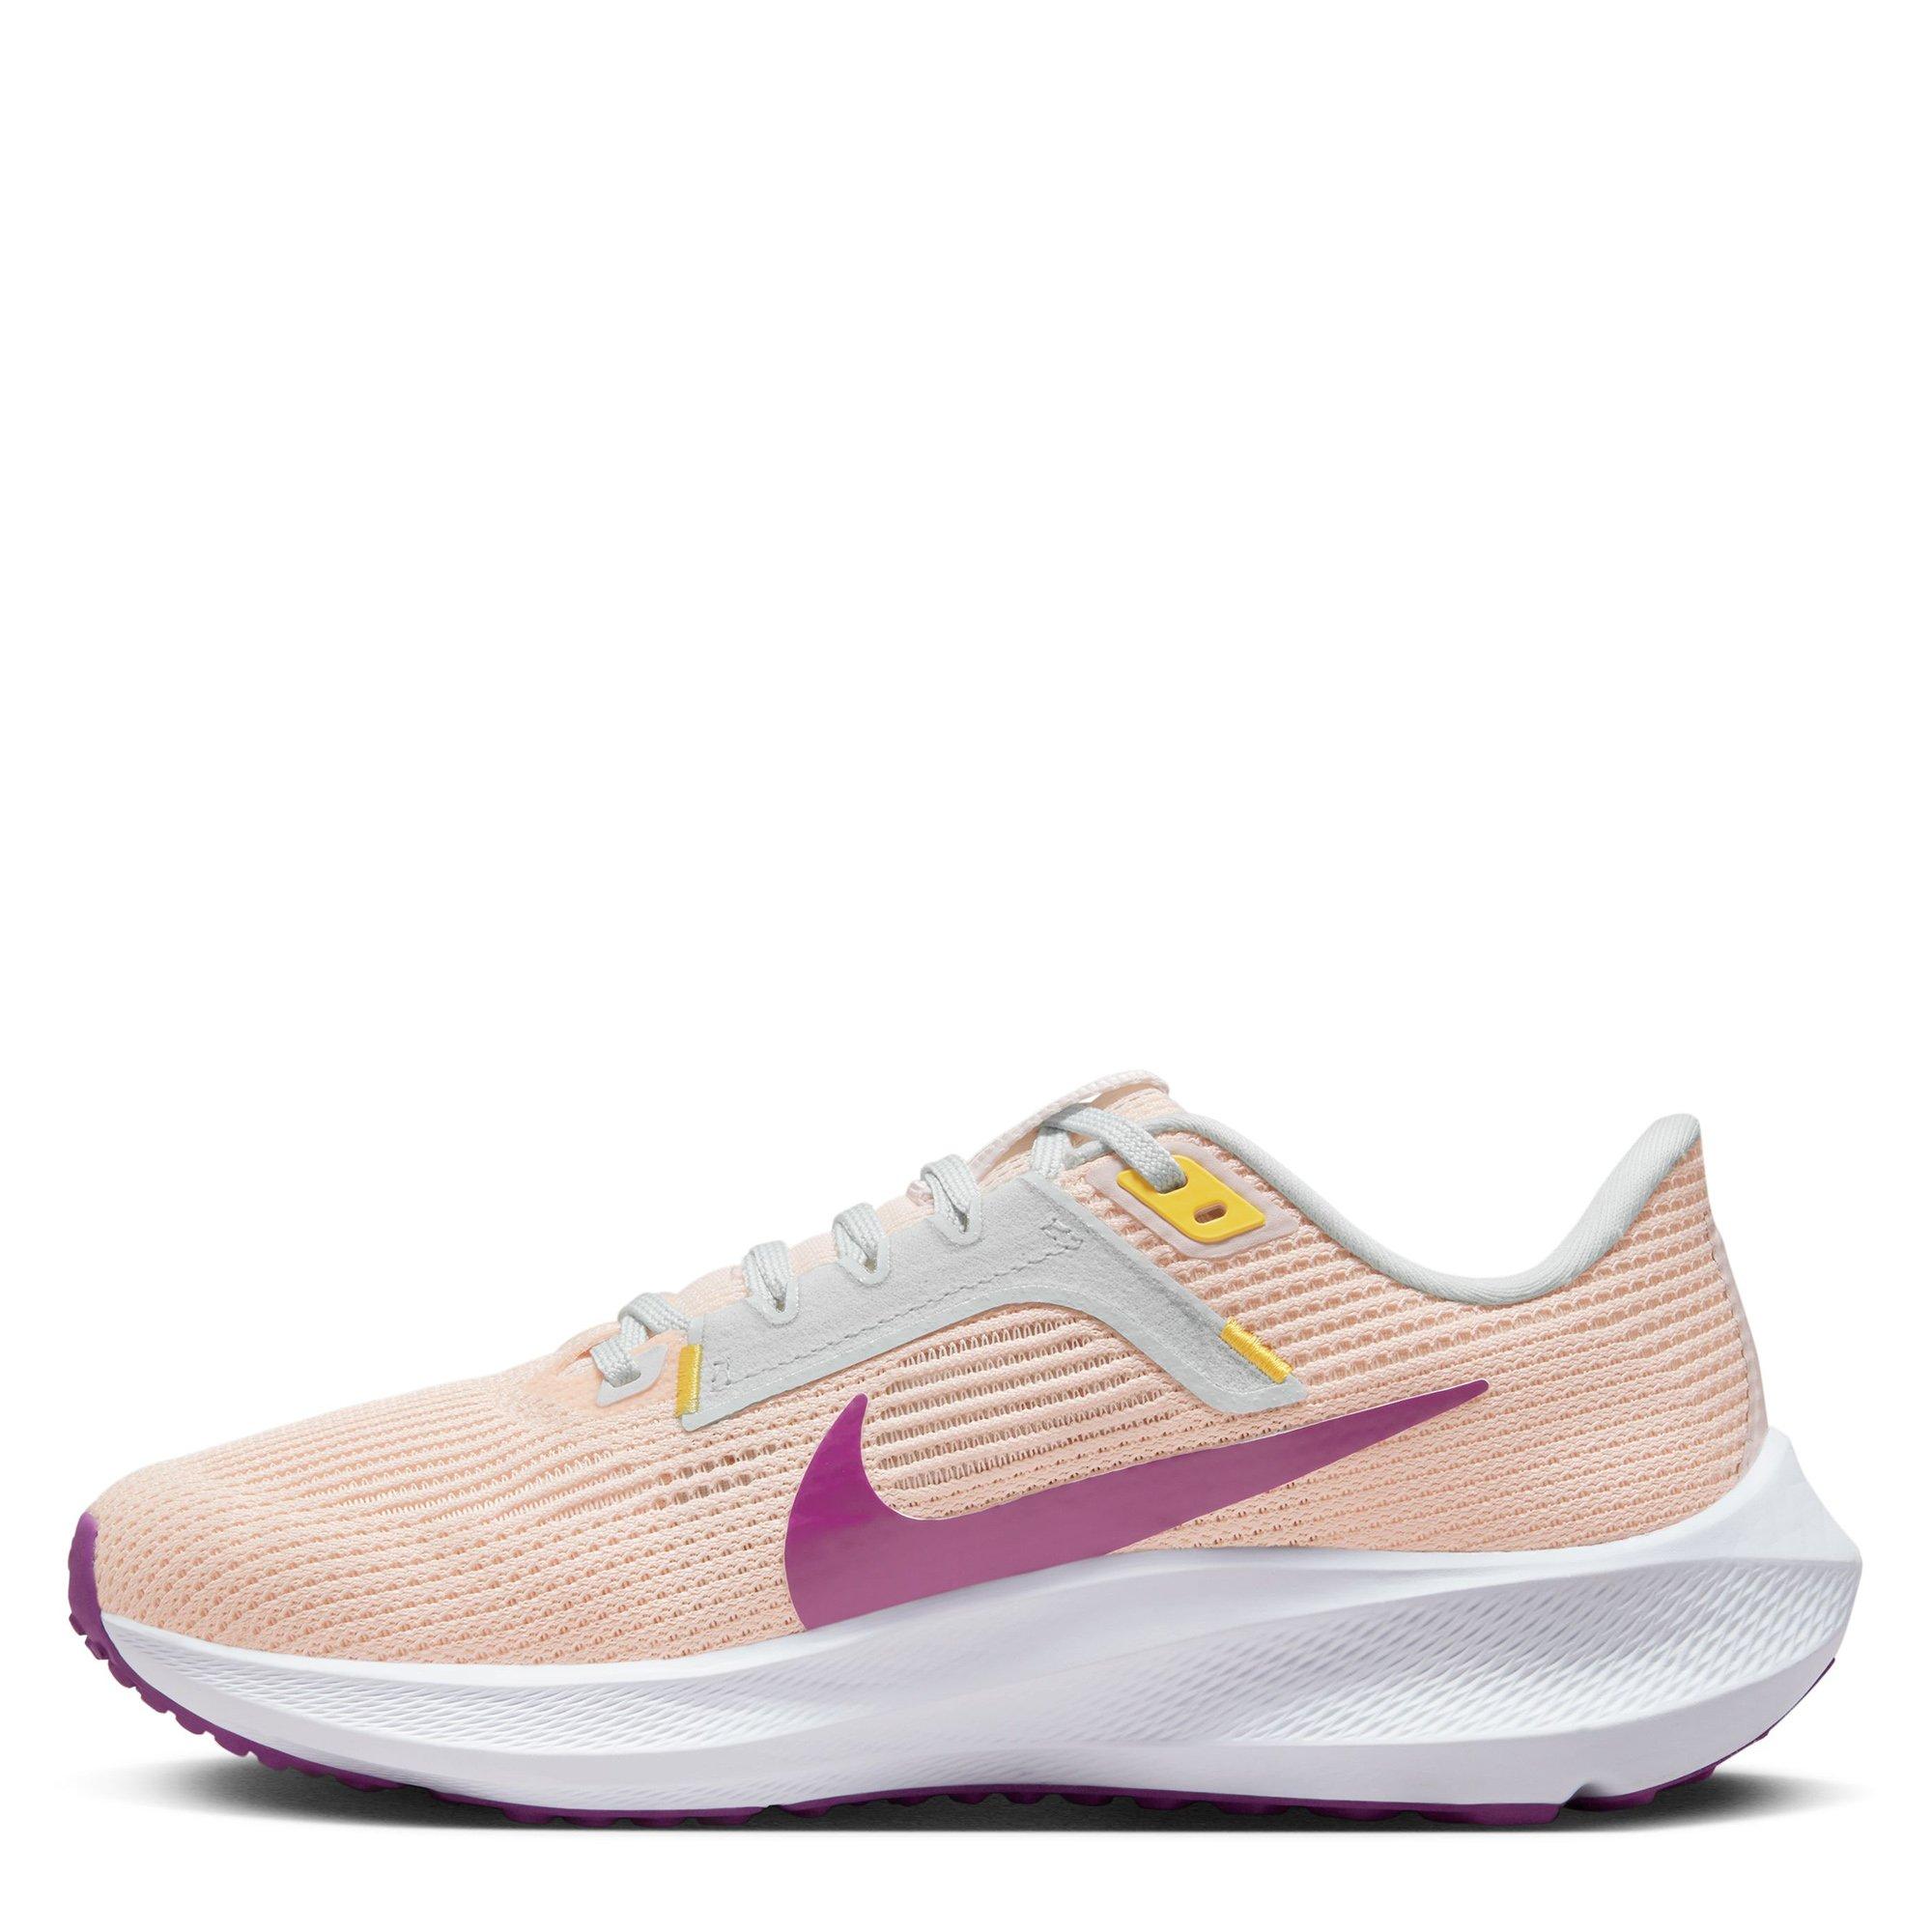 Nike | Armour Surge Womens Trainers | Everyday Neutral Road Running ...